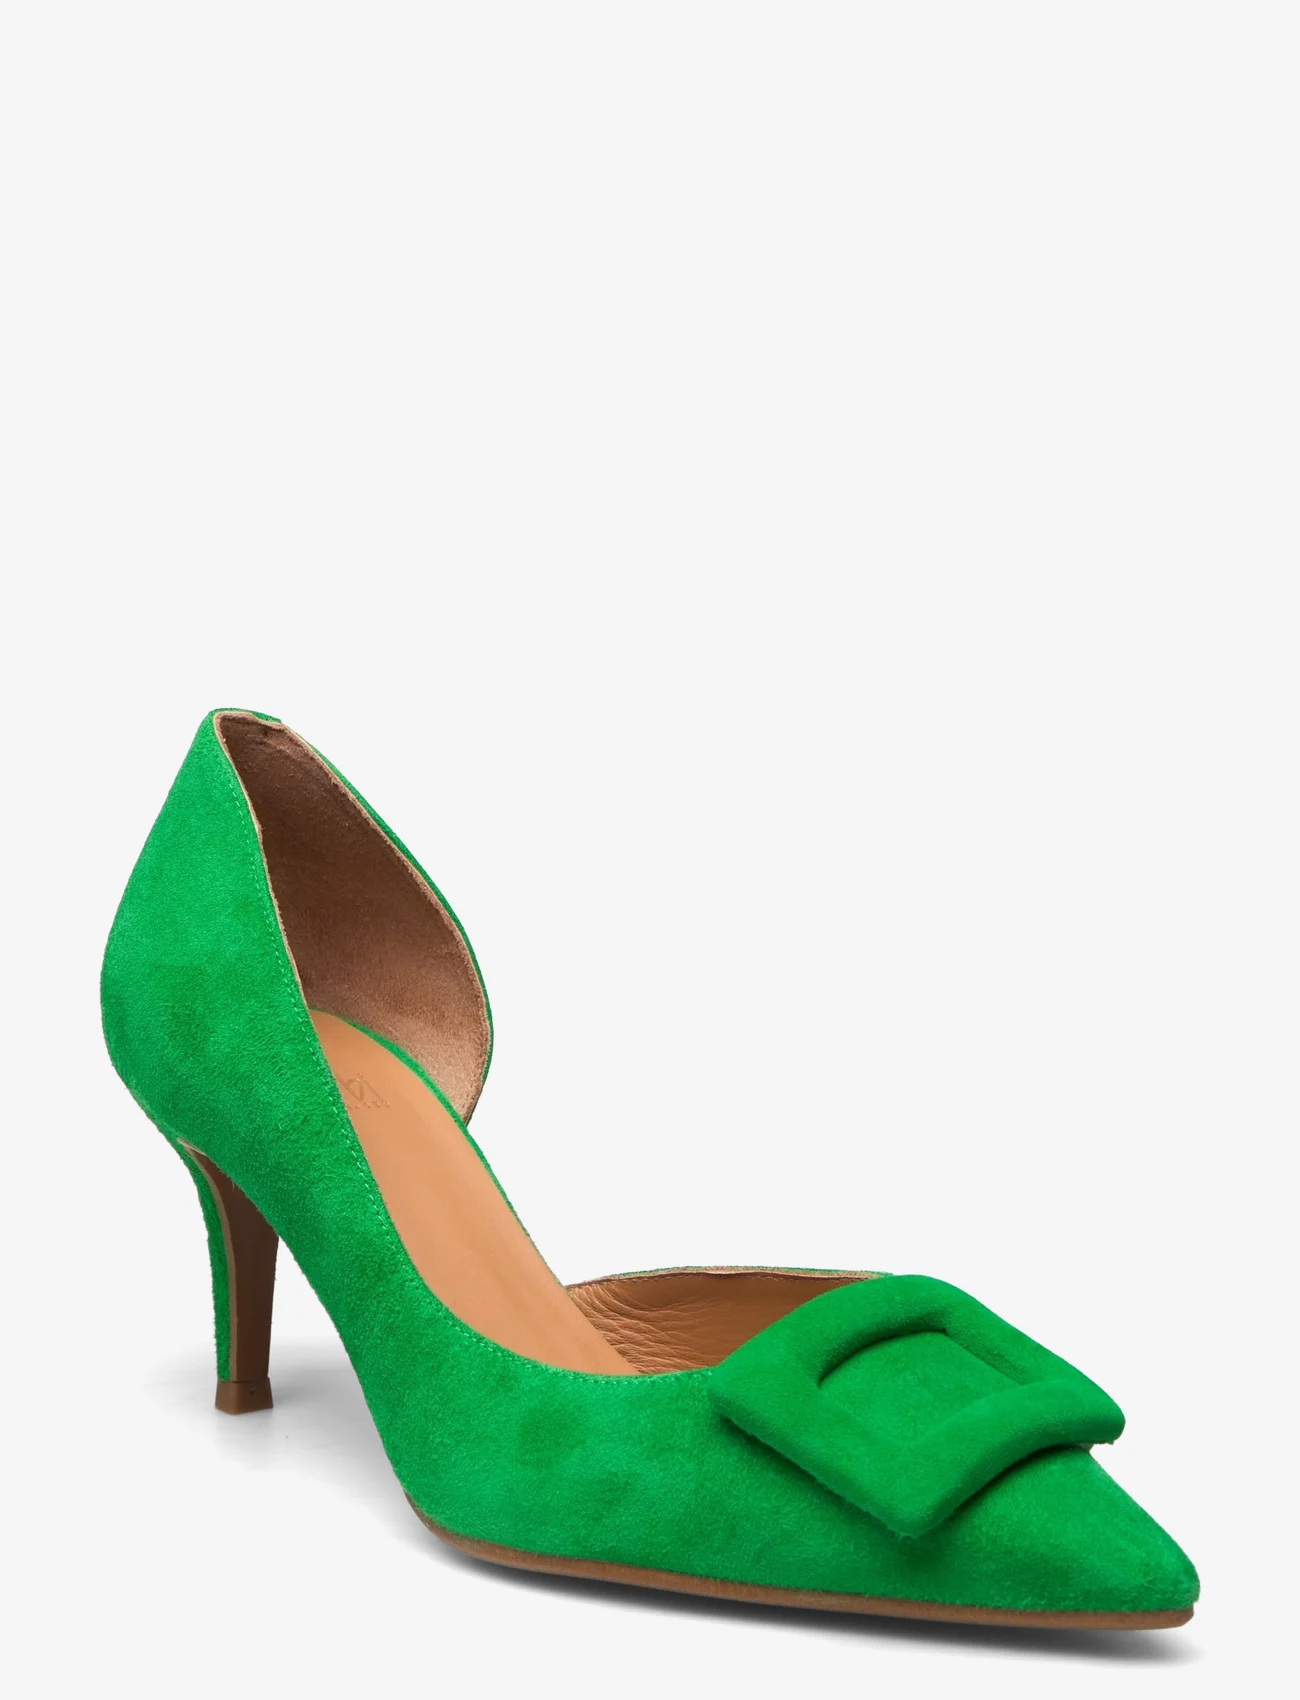 Billi Bi - A4603 - party wear at outlet prices - grass green suede - 0